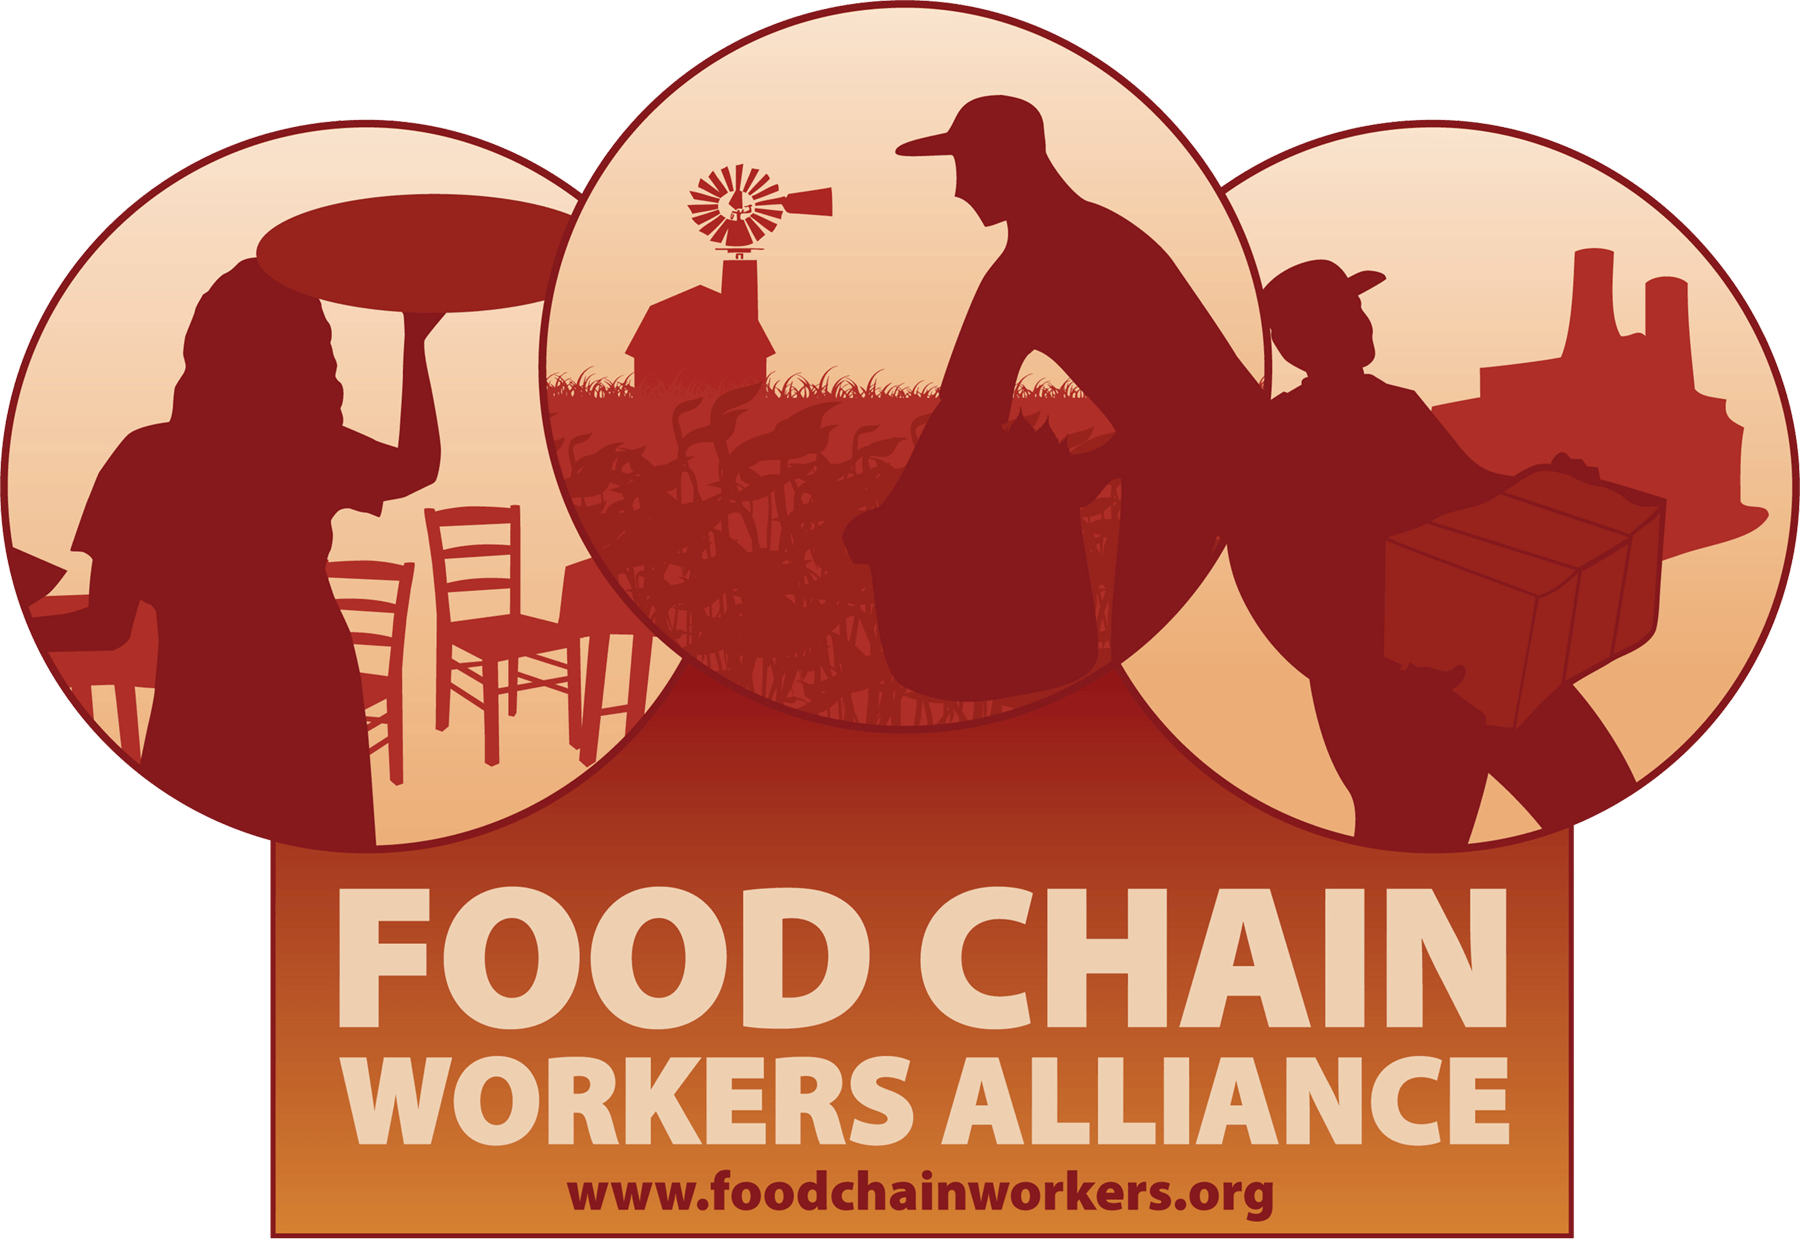 Food Chain Logo - We Are the Food Chain Workers Alliance - Food Chain Workers Alliance